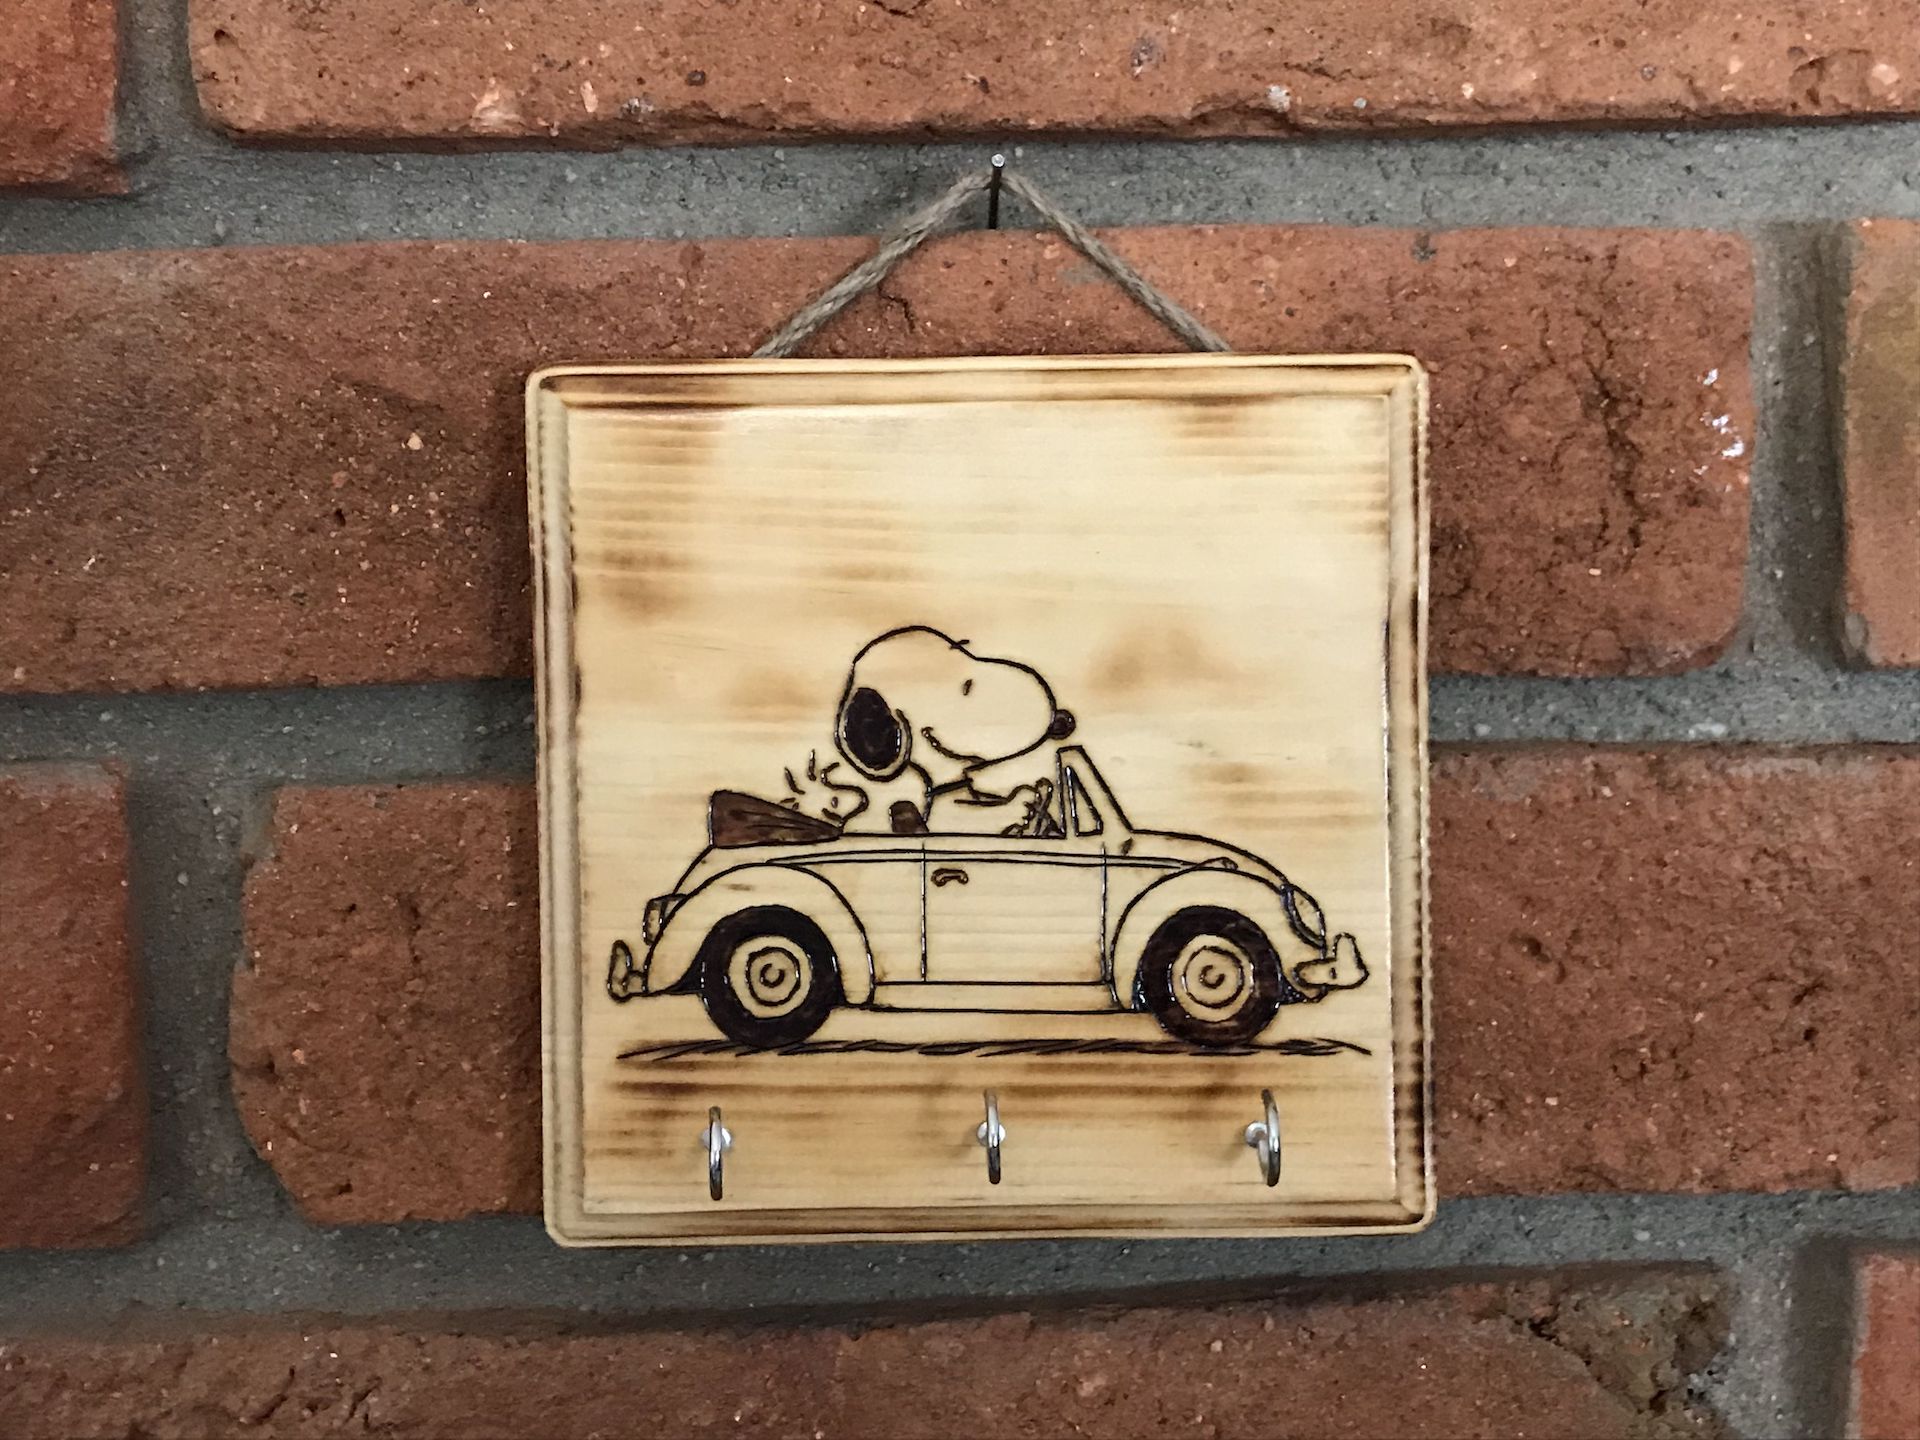 Tackle Today: What my old Beetle has taught me about trading (Snoopy Beetle key holder)